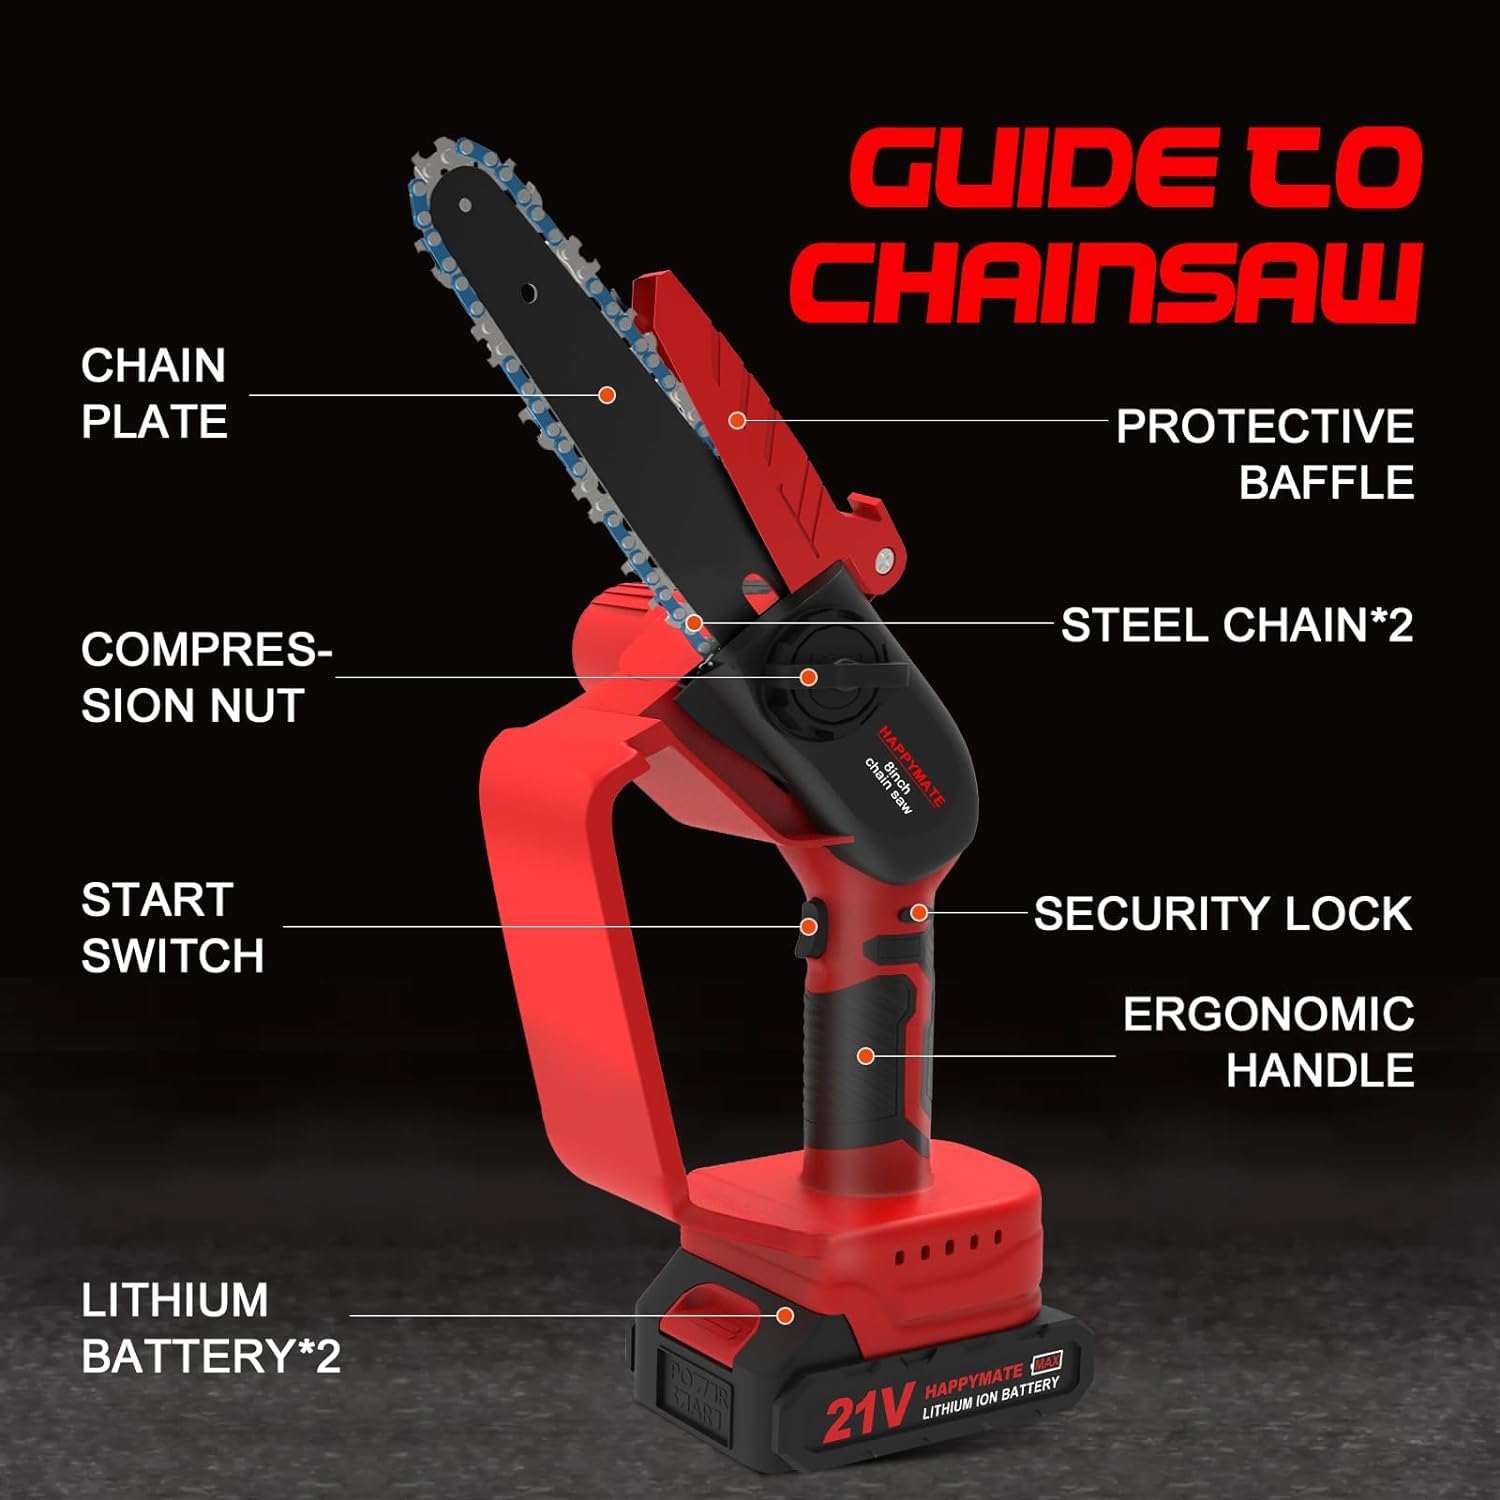 Mini Chainsaw Cordless 8 Inch,HAPPYMATE Mini Chainsaw with 2 Packs Rechargeable Batteries,One-Handed Electric Chainsaw for Wood Branch Cutting and Tree Trimming,Red